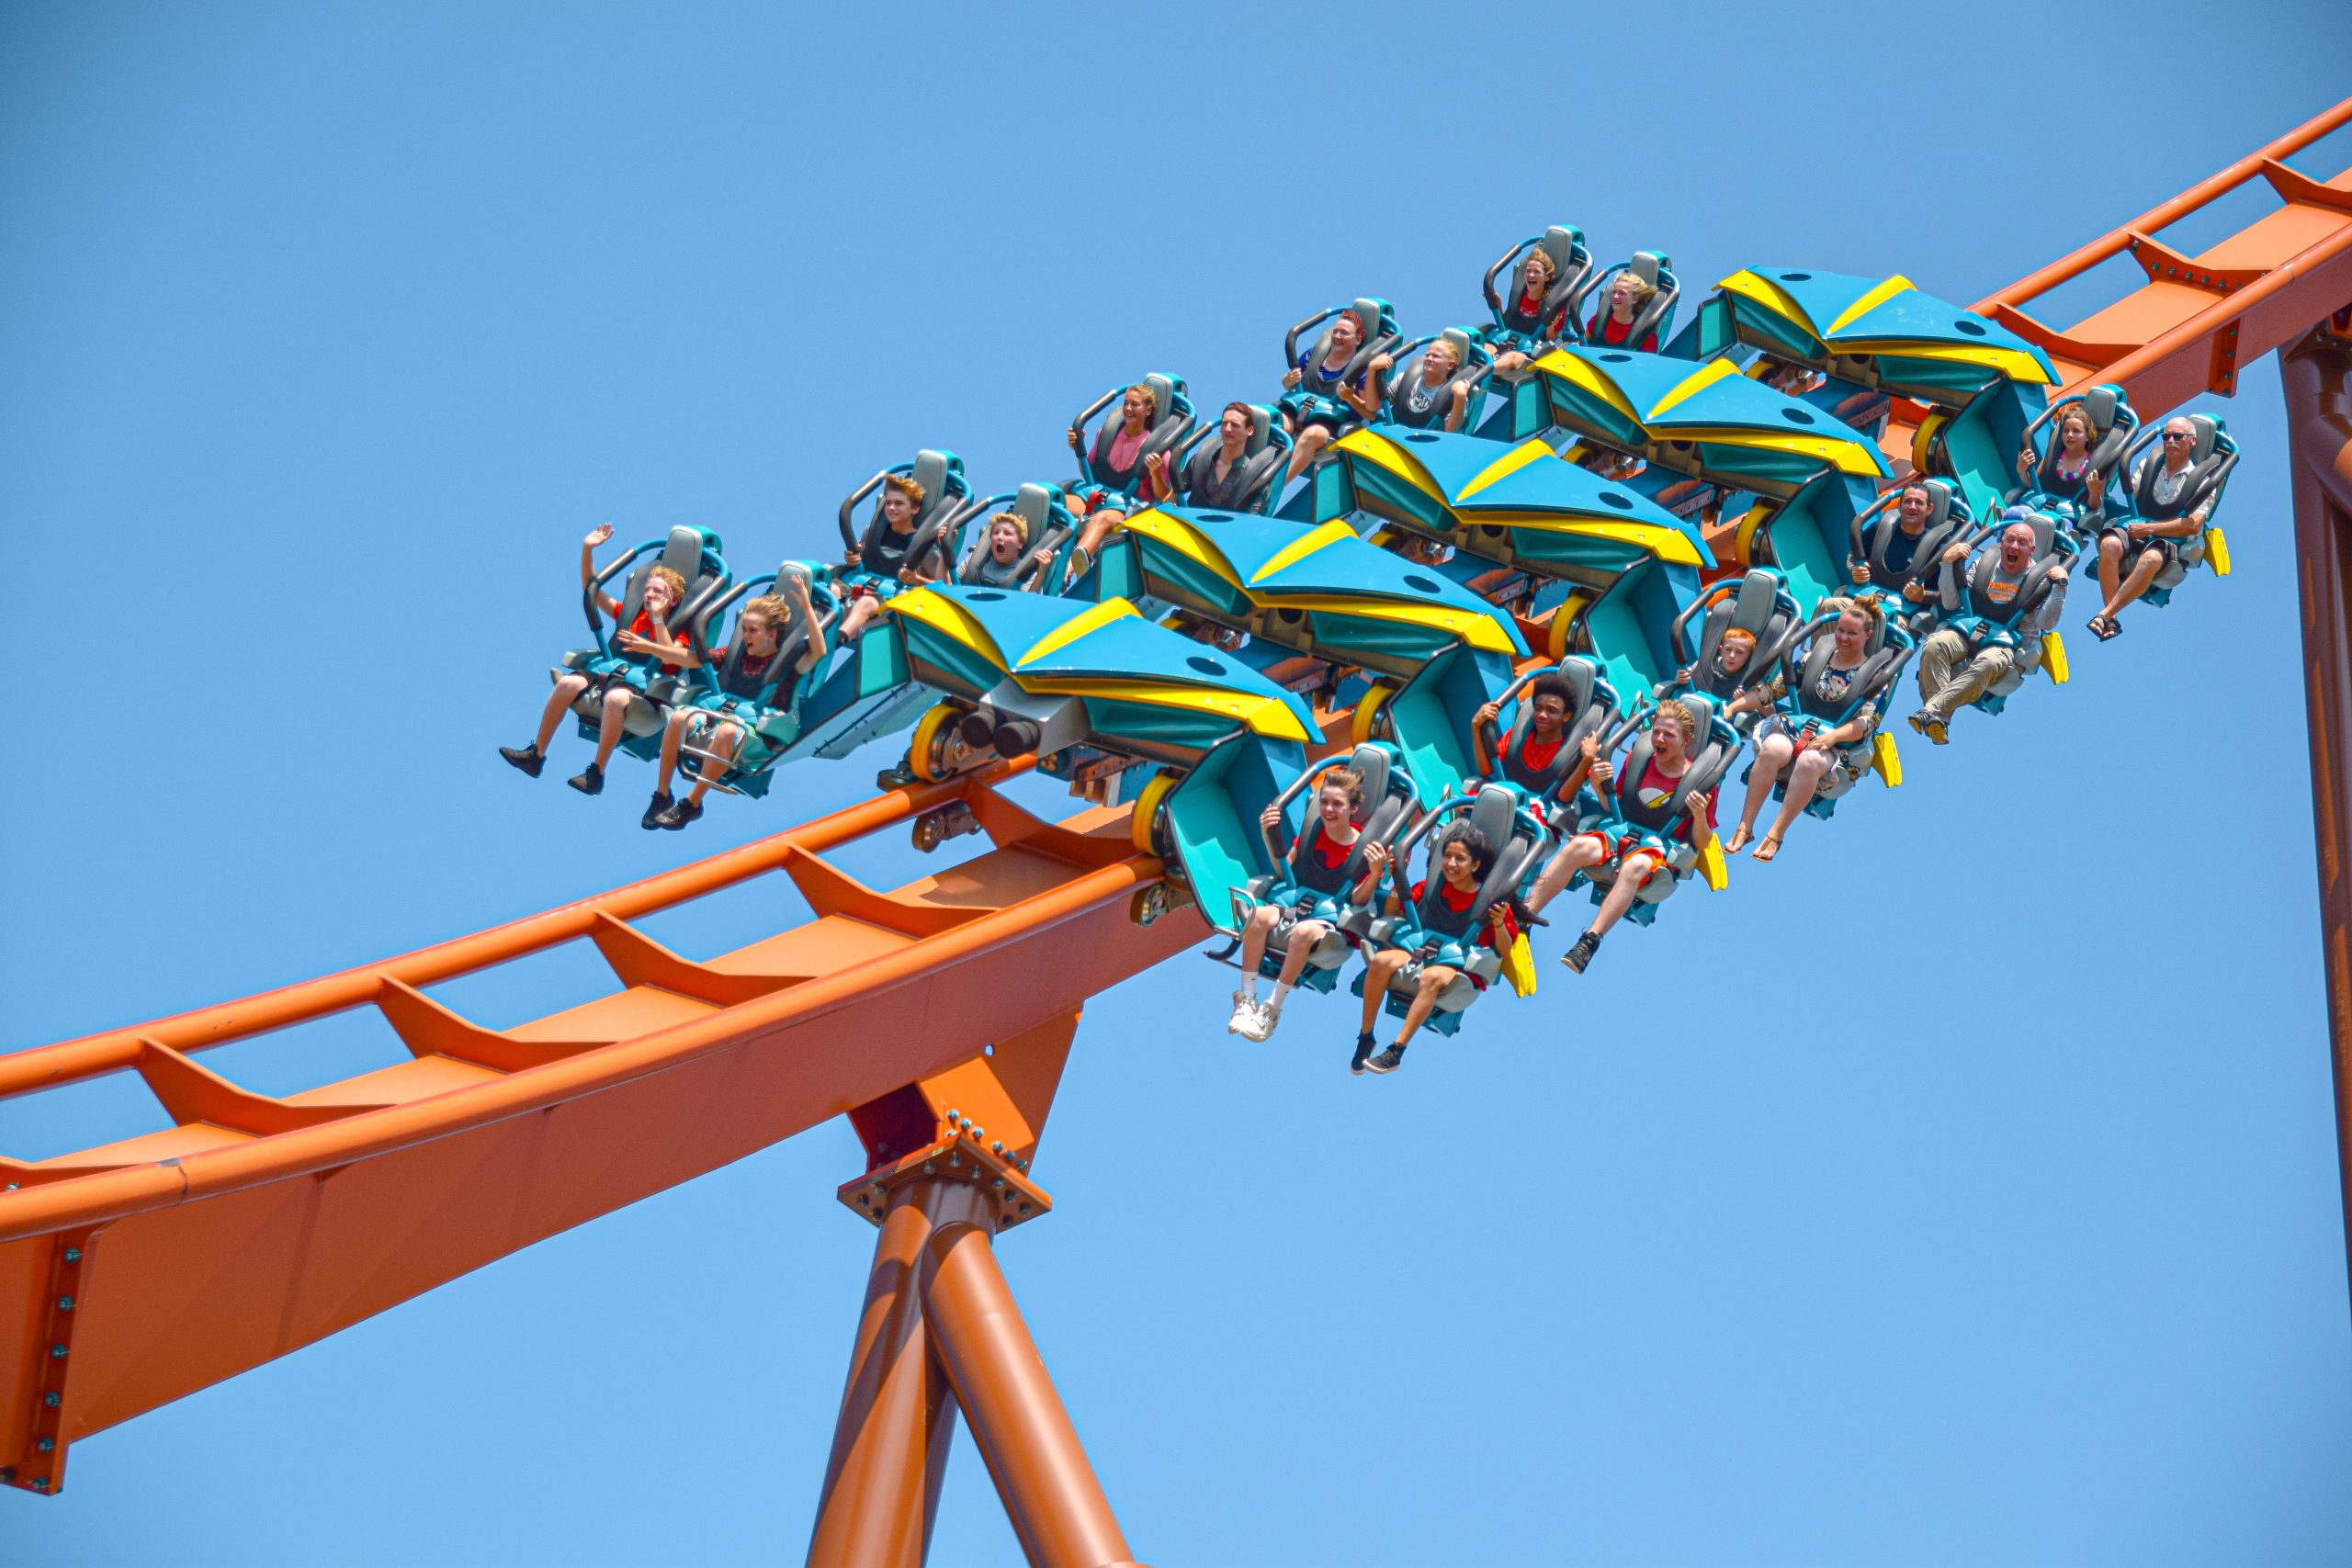 Which Companies Make Winged Coasters?